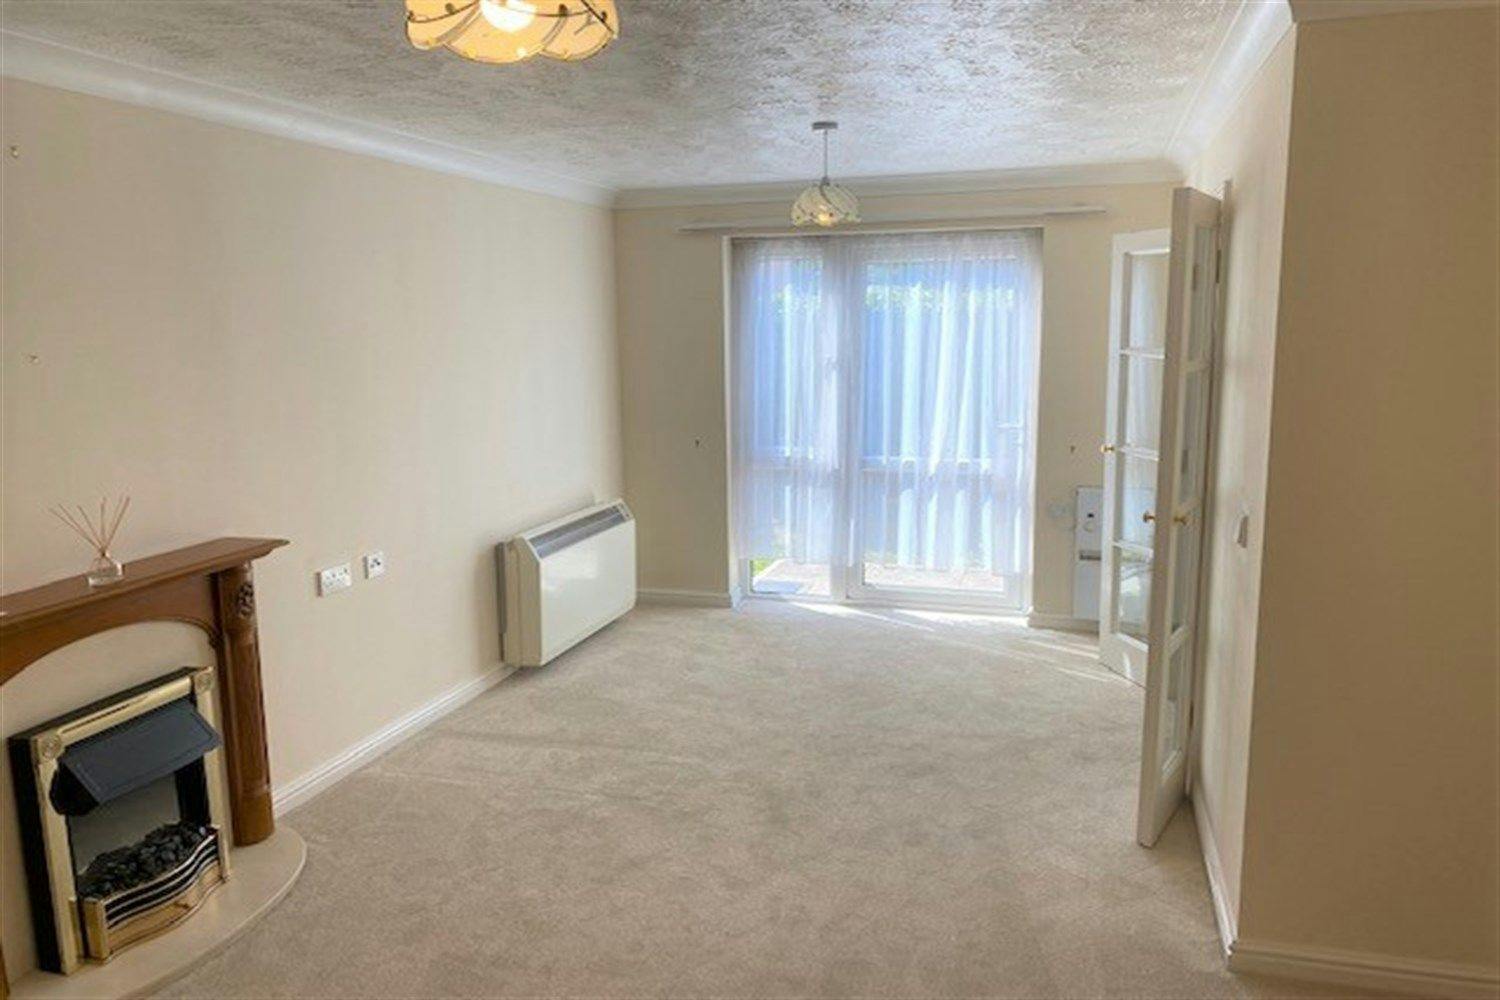 Living Room at Conrad Court Retirement Apartment in Stanford-le-Hope, Thurrock